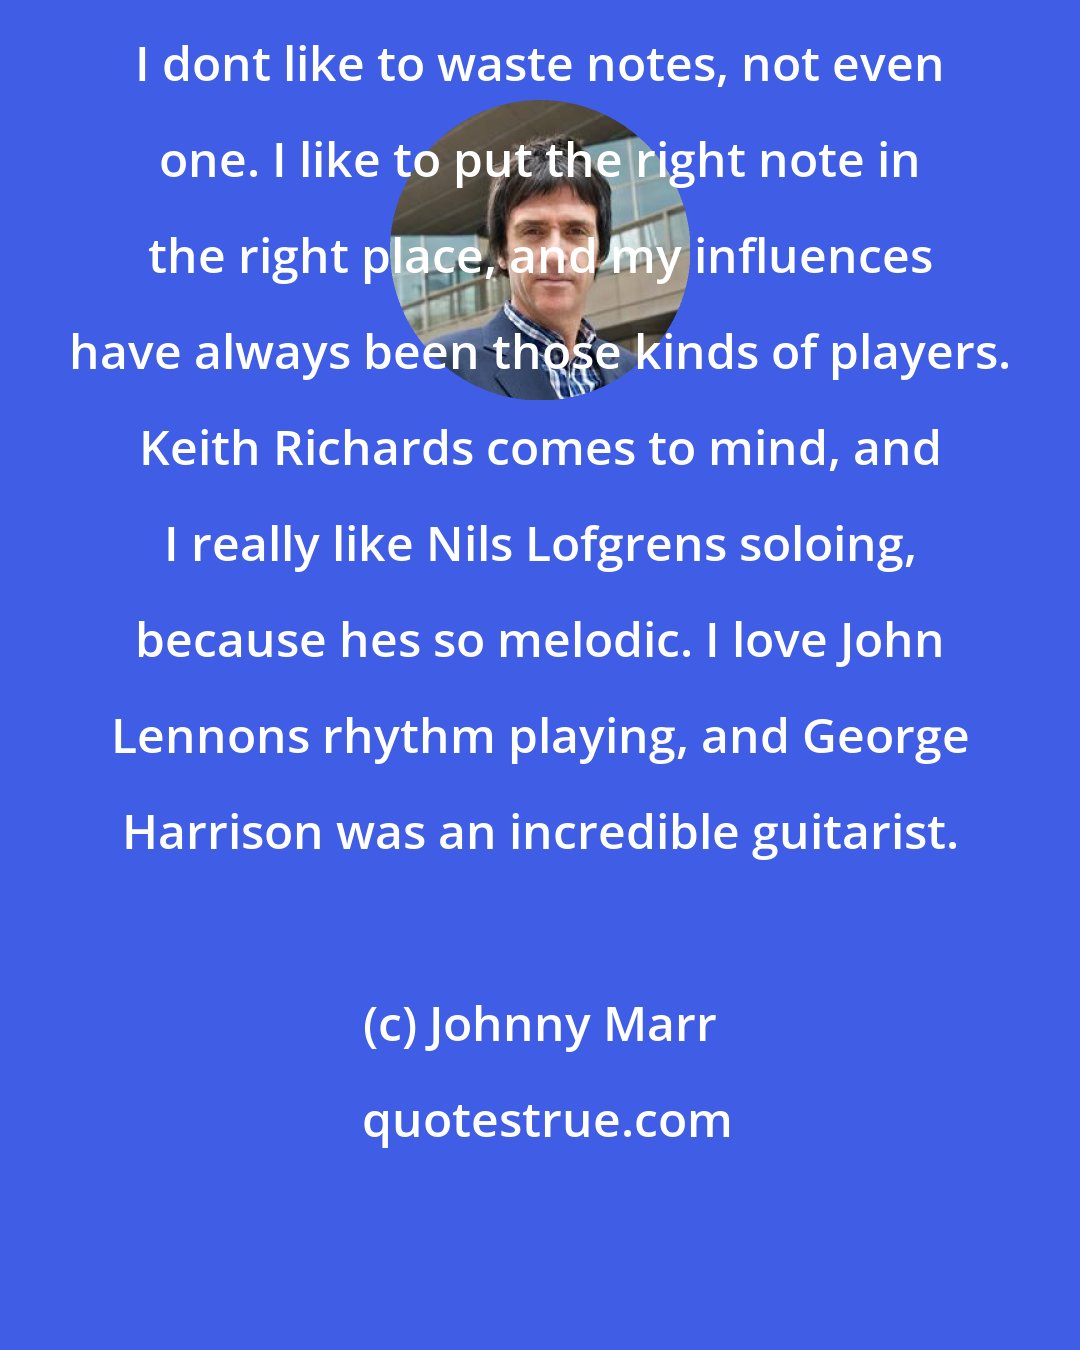 Johnny Marr: I dont like to waste notes, not even one. I like to put the right note in the right place, and my influences have always been those kinds of players. Keith Richards comes to mind, and I really like Nils Lofgrens soloing, because hes so melodic. I love John Lennons rhythm playing, and George Harrison was an incredible guitarist.